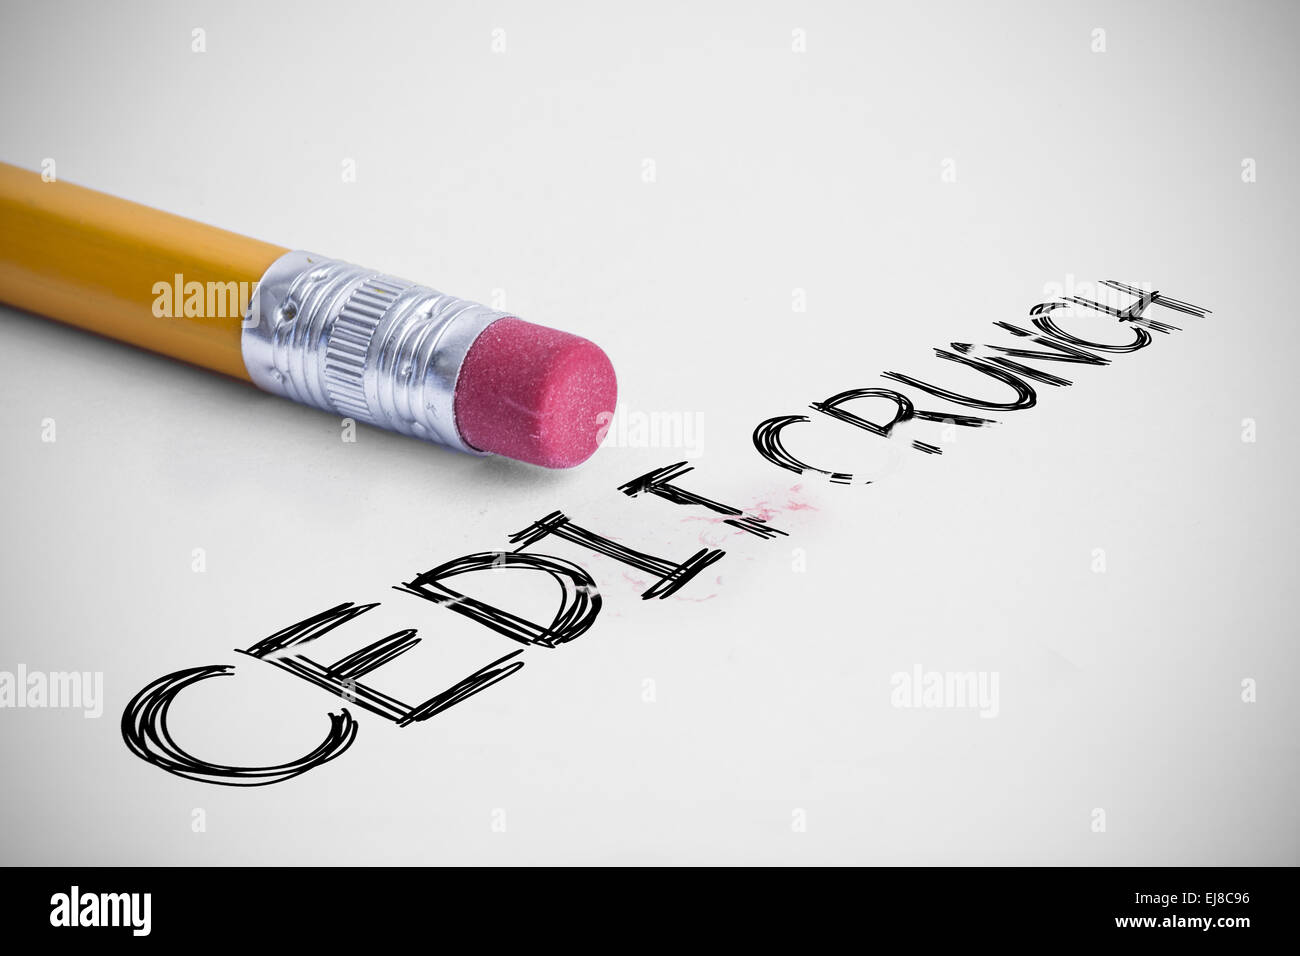 Credit crunch against pencil with an eraser Stock Photo